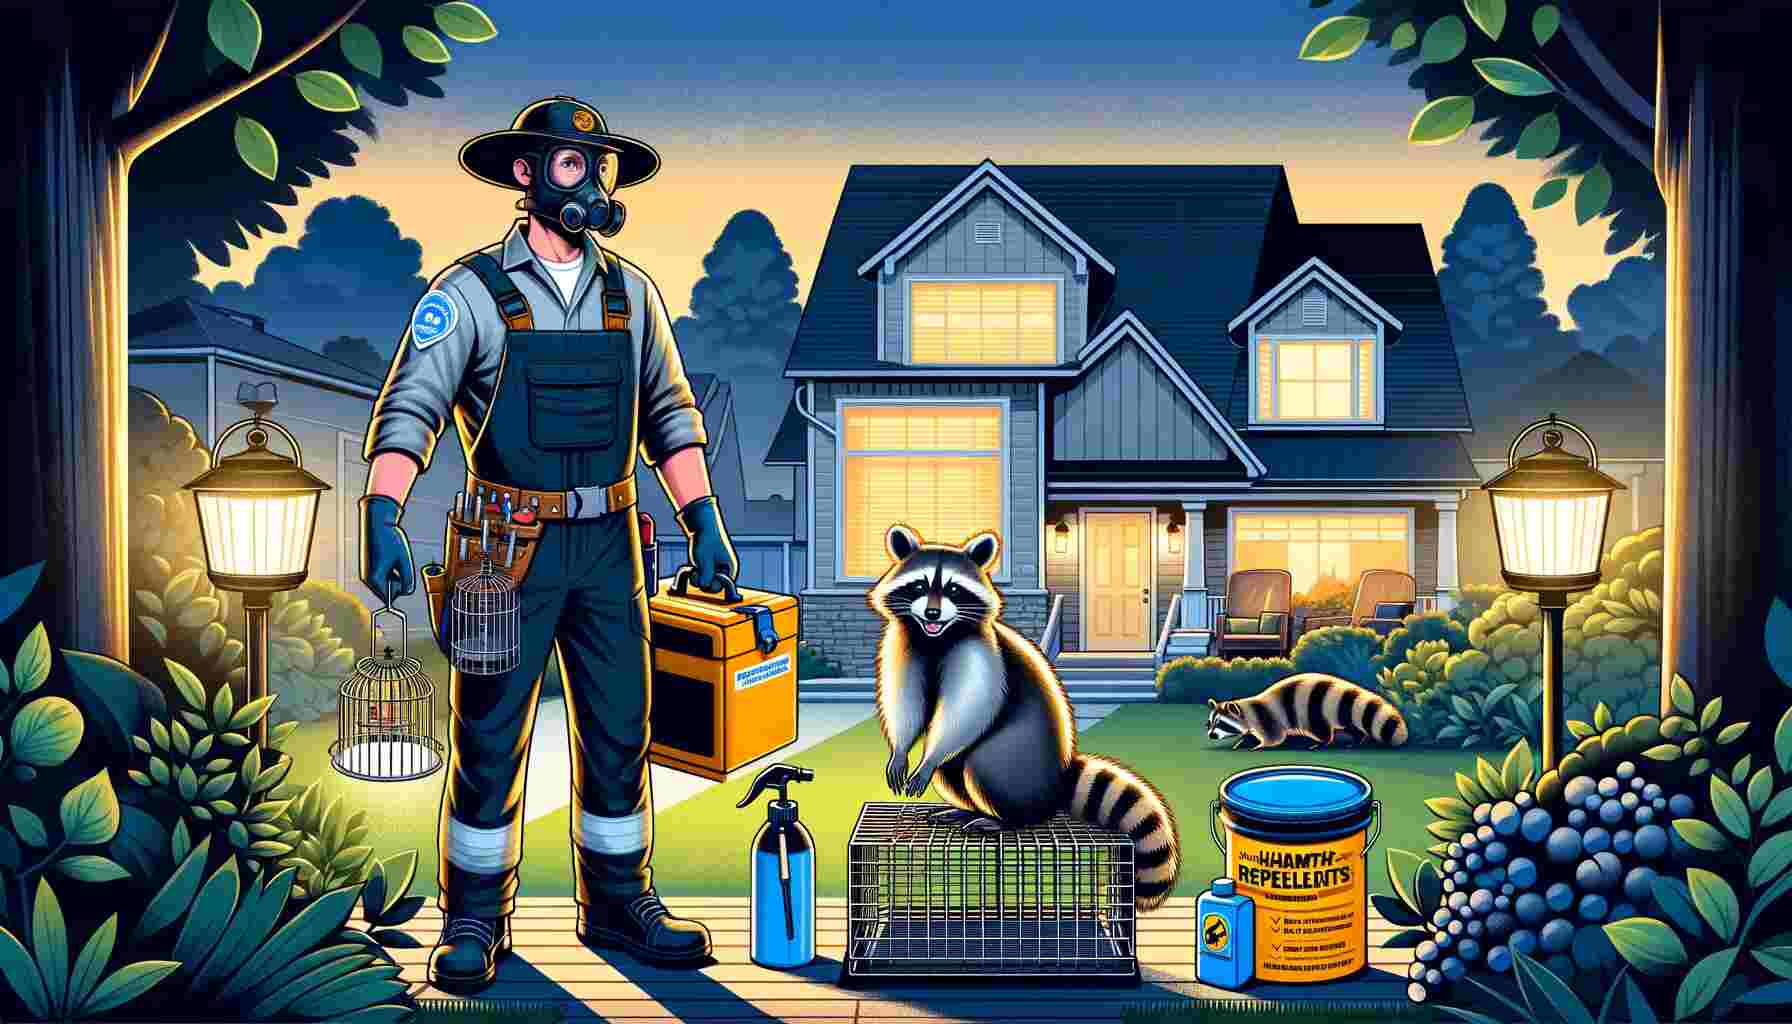 Professional pest control expert in uniform setting up humane traps and using non-harmful repellents in a suburban garden at dusk to deter raccoons, with a residential home in the background, conveying a sense of efficiency and humane wildlife treatment.